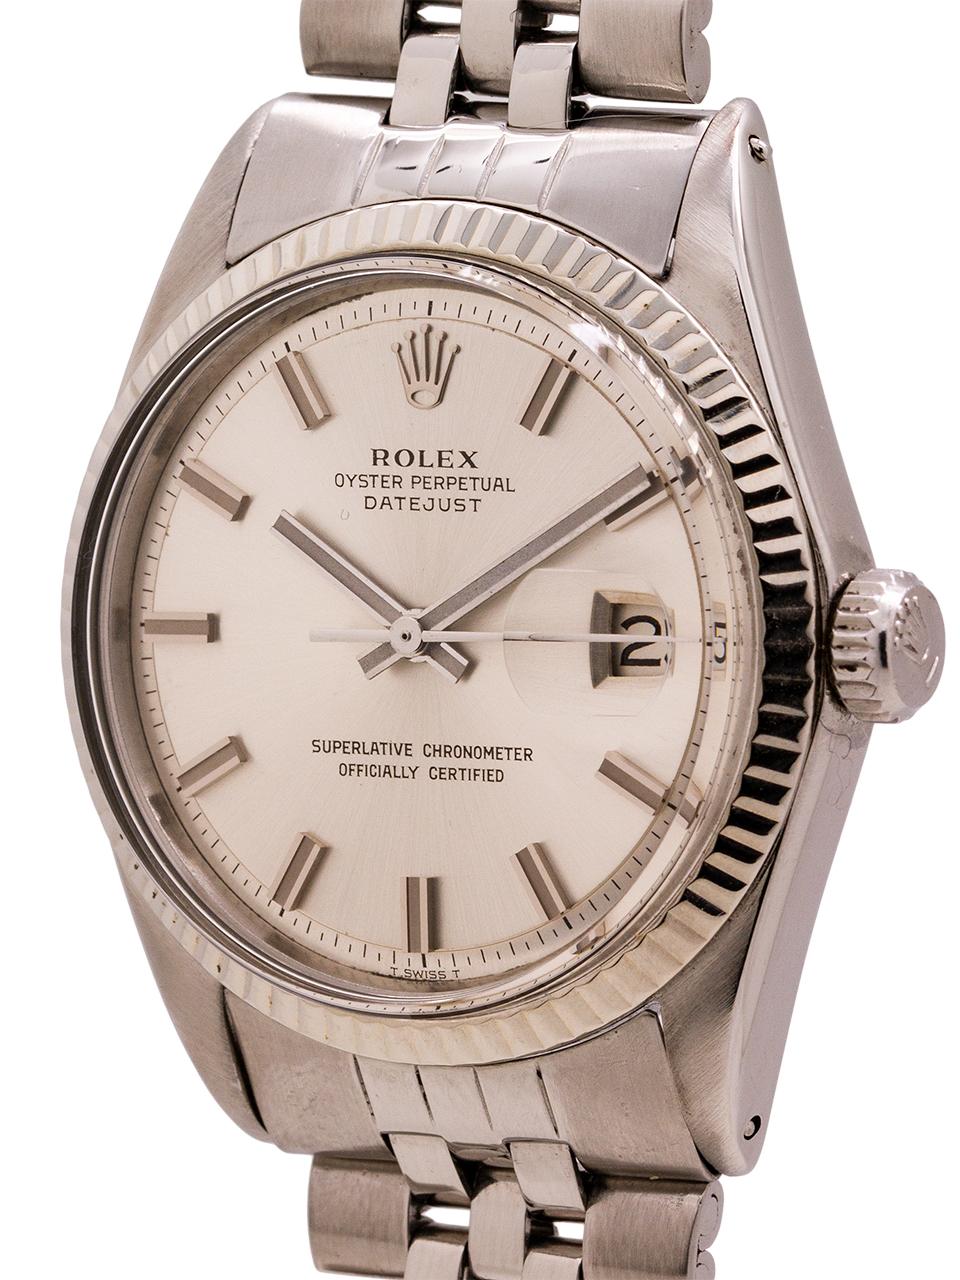 
Rolex Oyster Perpetual Datejust ref 1601 serial# 2.6 million circa 1970. 36mm diameter case with 14K WG fluted bezel and acrylic crystal and original silver satin pie pan “Fat Boy” dial with wide applied silver indexes and silver baton hands. The